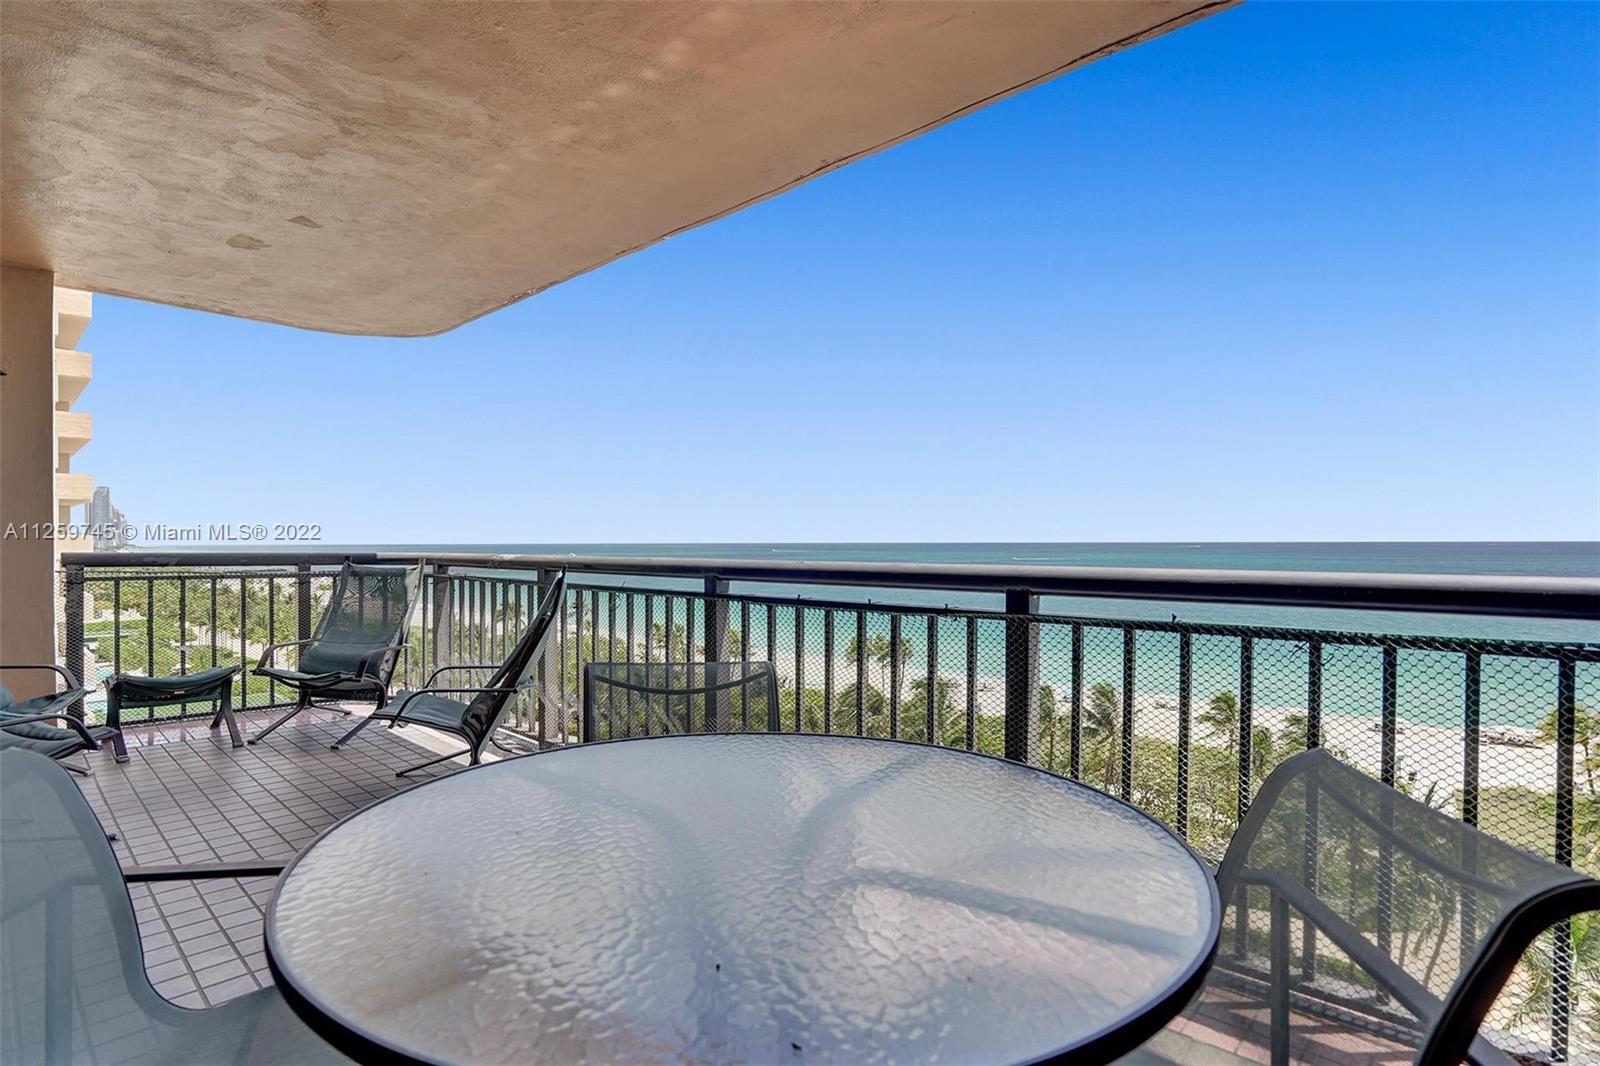 Spectacular direct ocean view!!!! This is the best three bedroom now available in the most foresee z